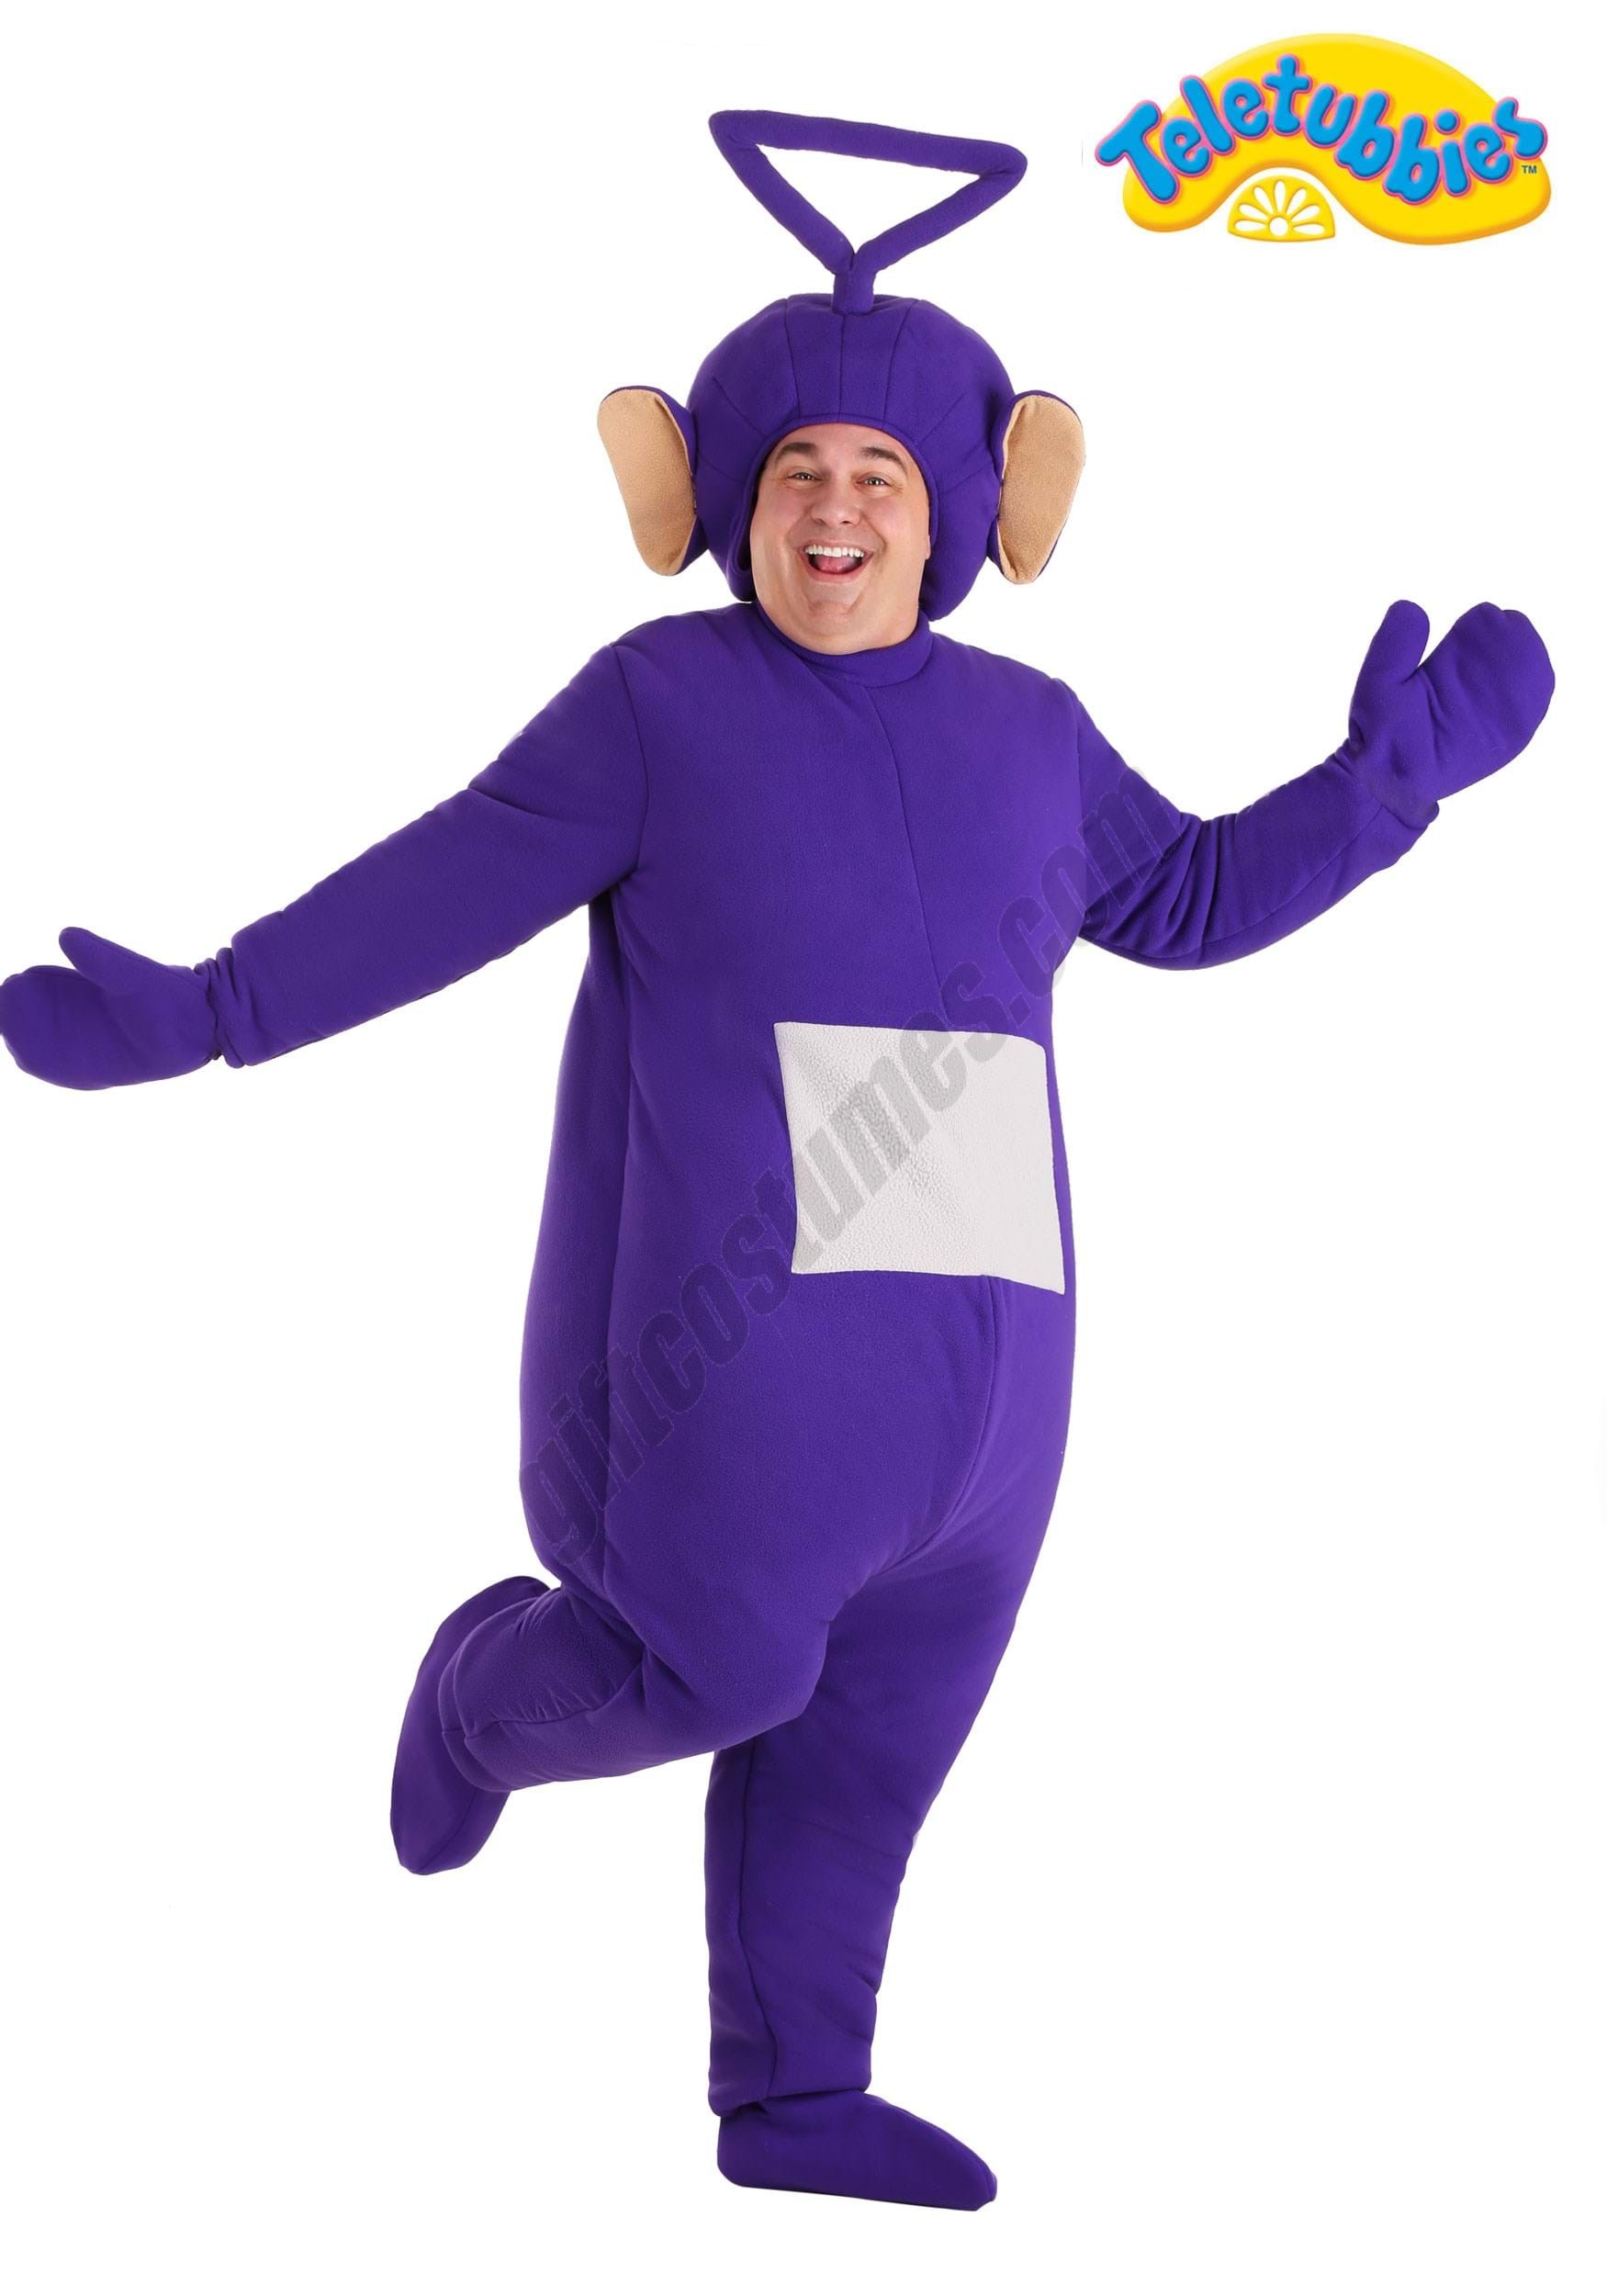 Plus Size Tinky Winky Teletubbies Costume for Adults Promotions - Plus Size Tinky Winky Teletubbies Costume for Adults Promotions